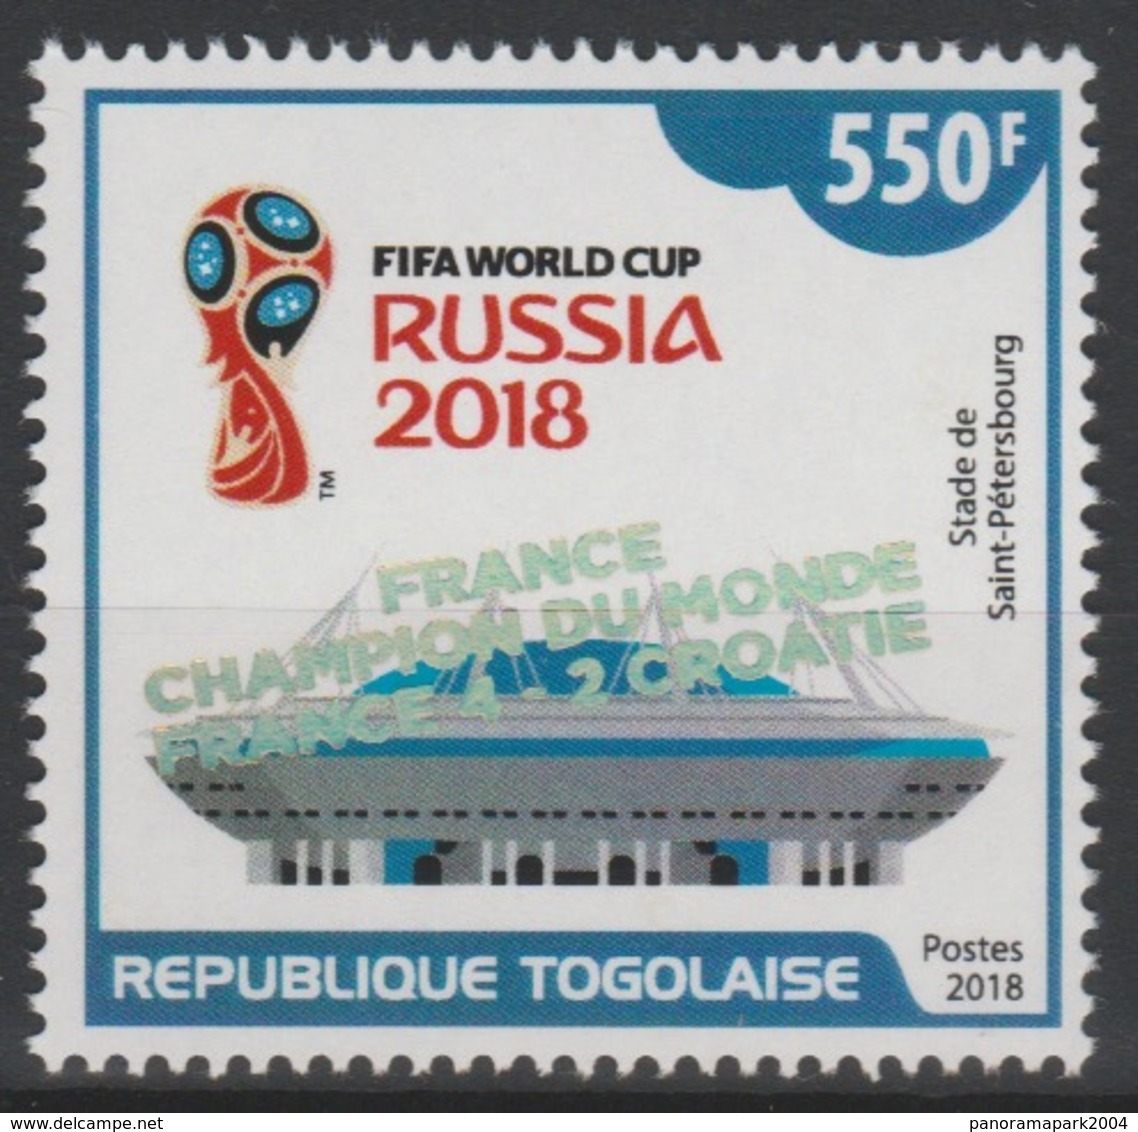 Togo 2018 Mi. ? Surch. Ovpt. "FRANCE CHAMPION" FIFA World Cup WM Coupe Du Monde Russie Russia Football Fußball Soccer - 2018 – Russland